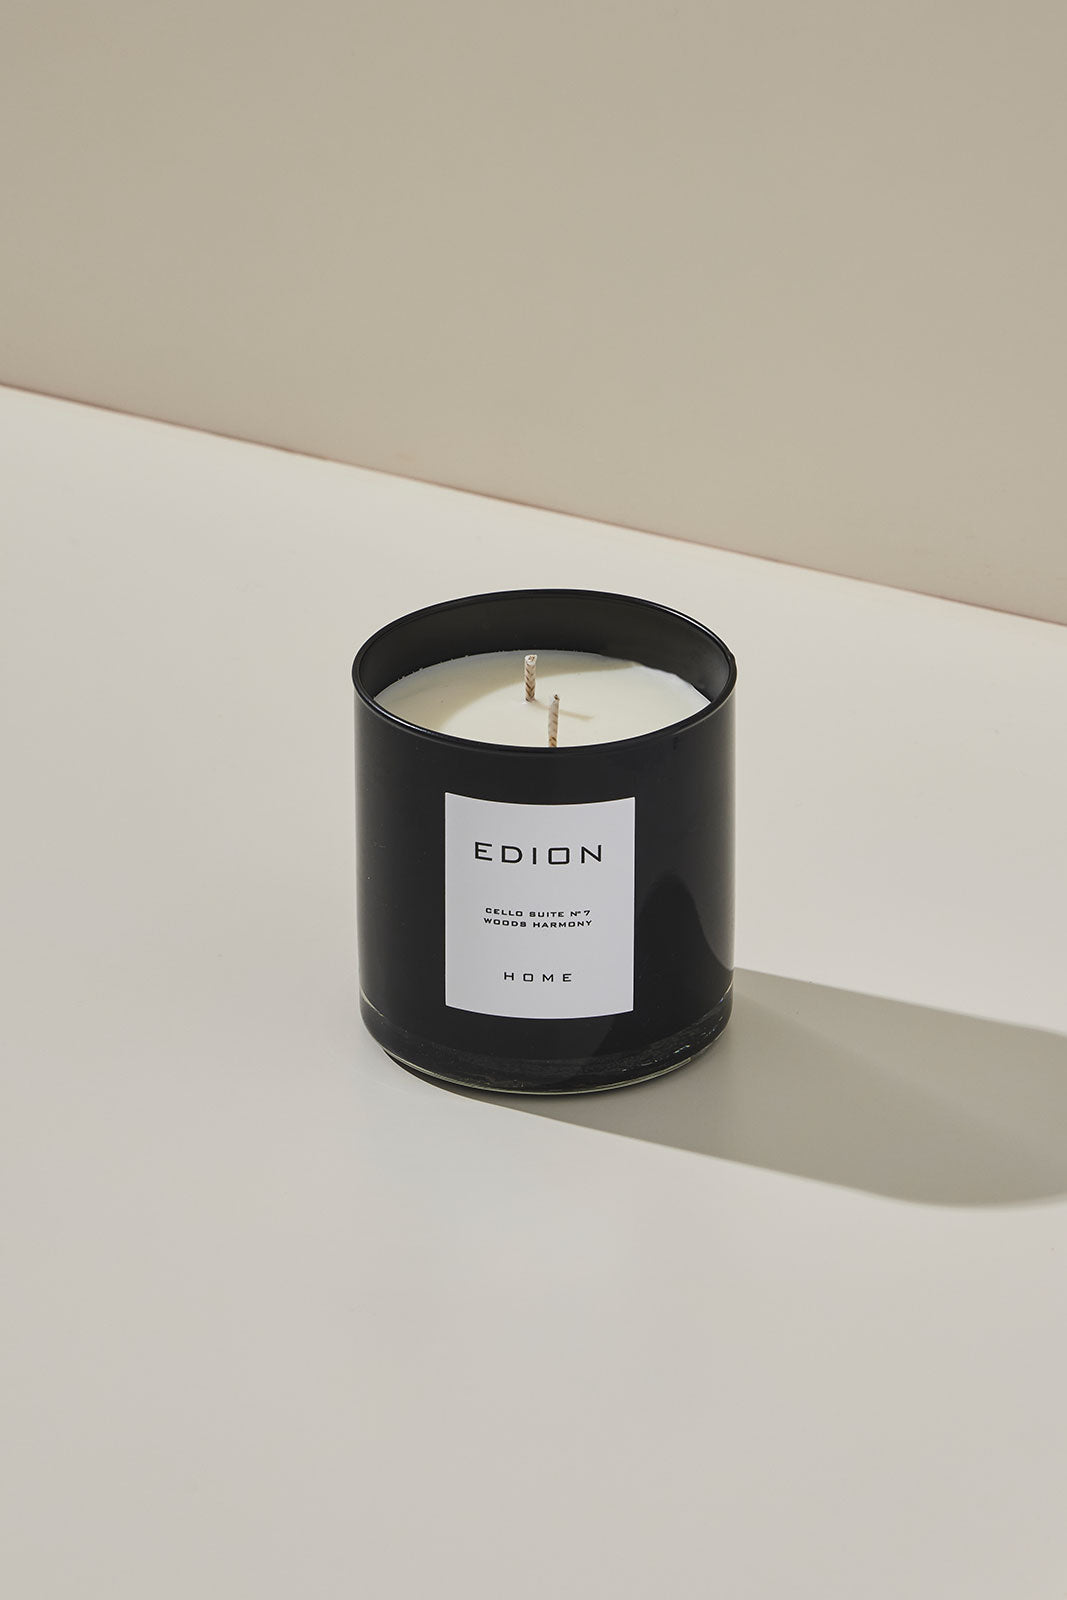 Scented candle Cello suite n.7 woods harmony